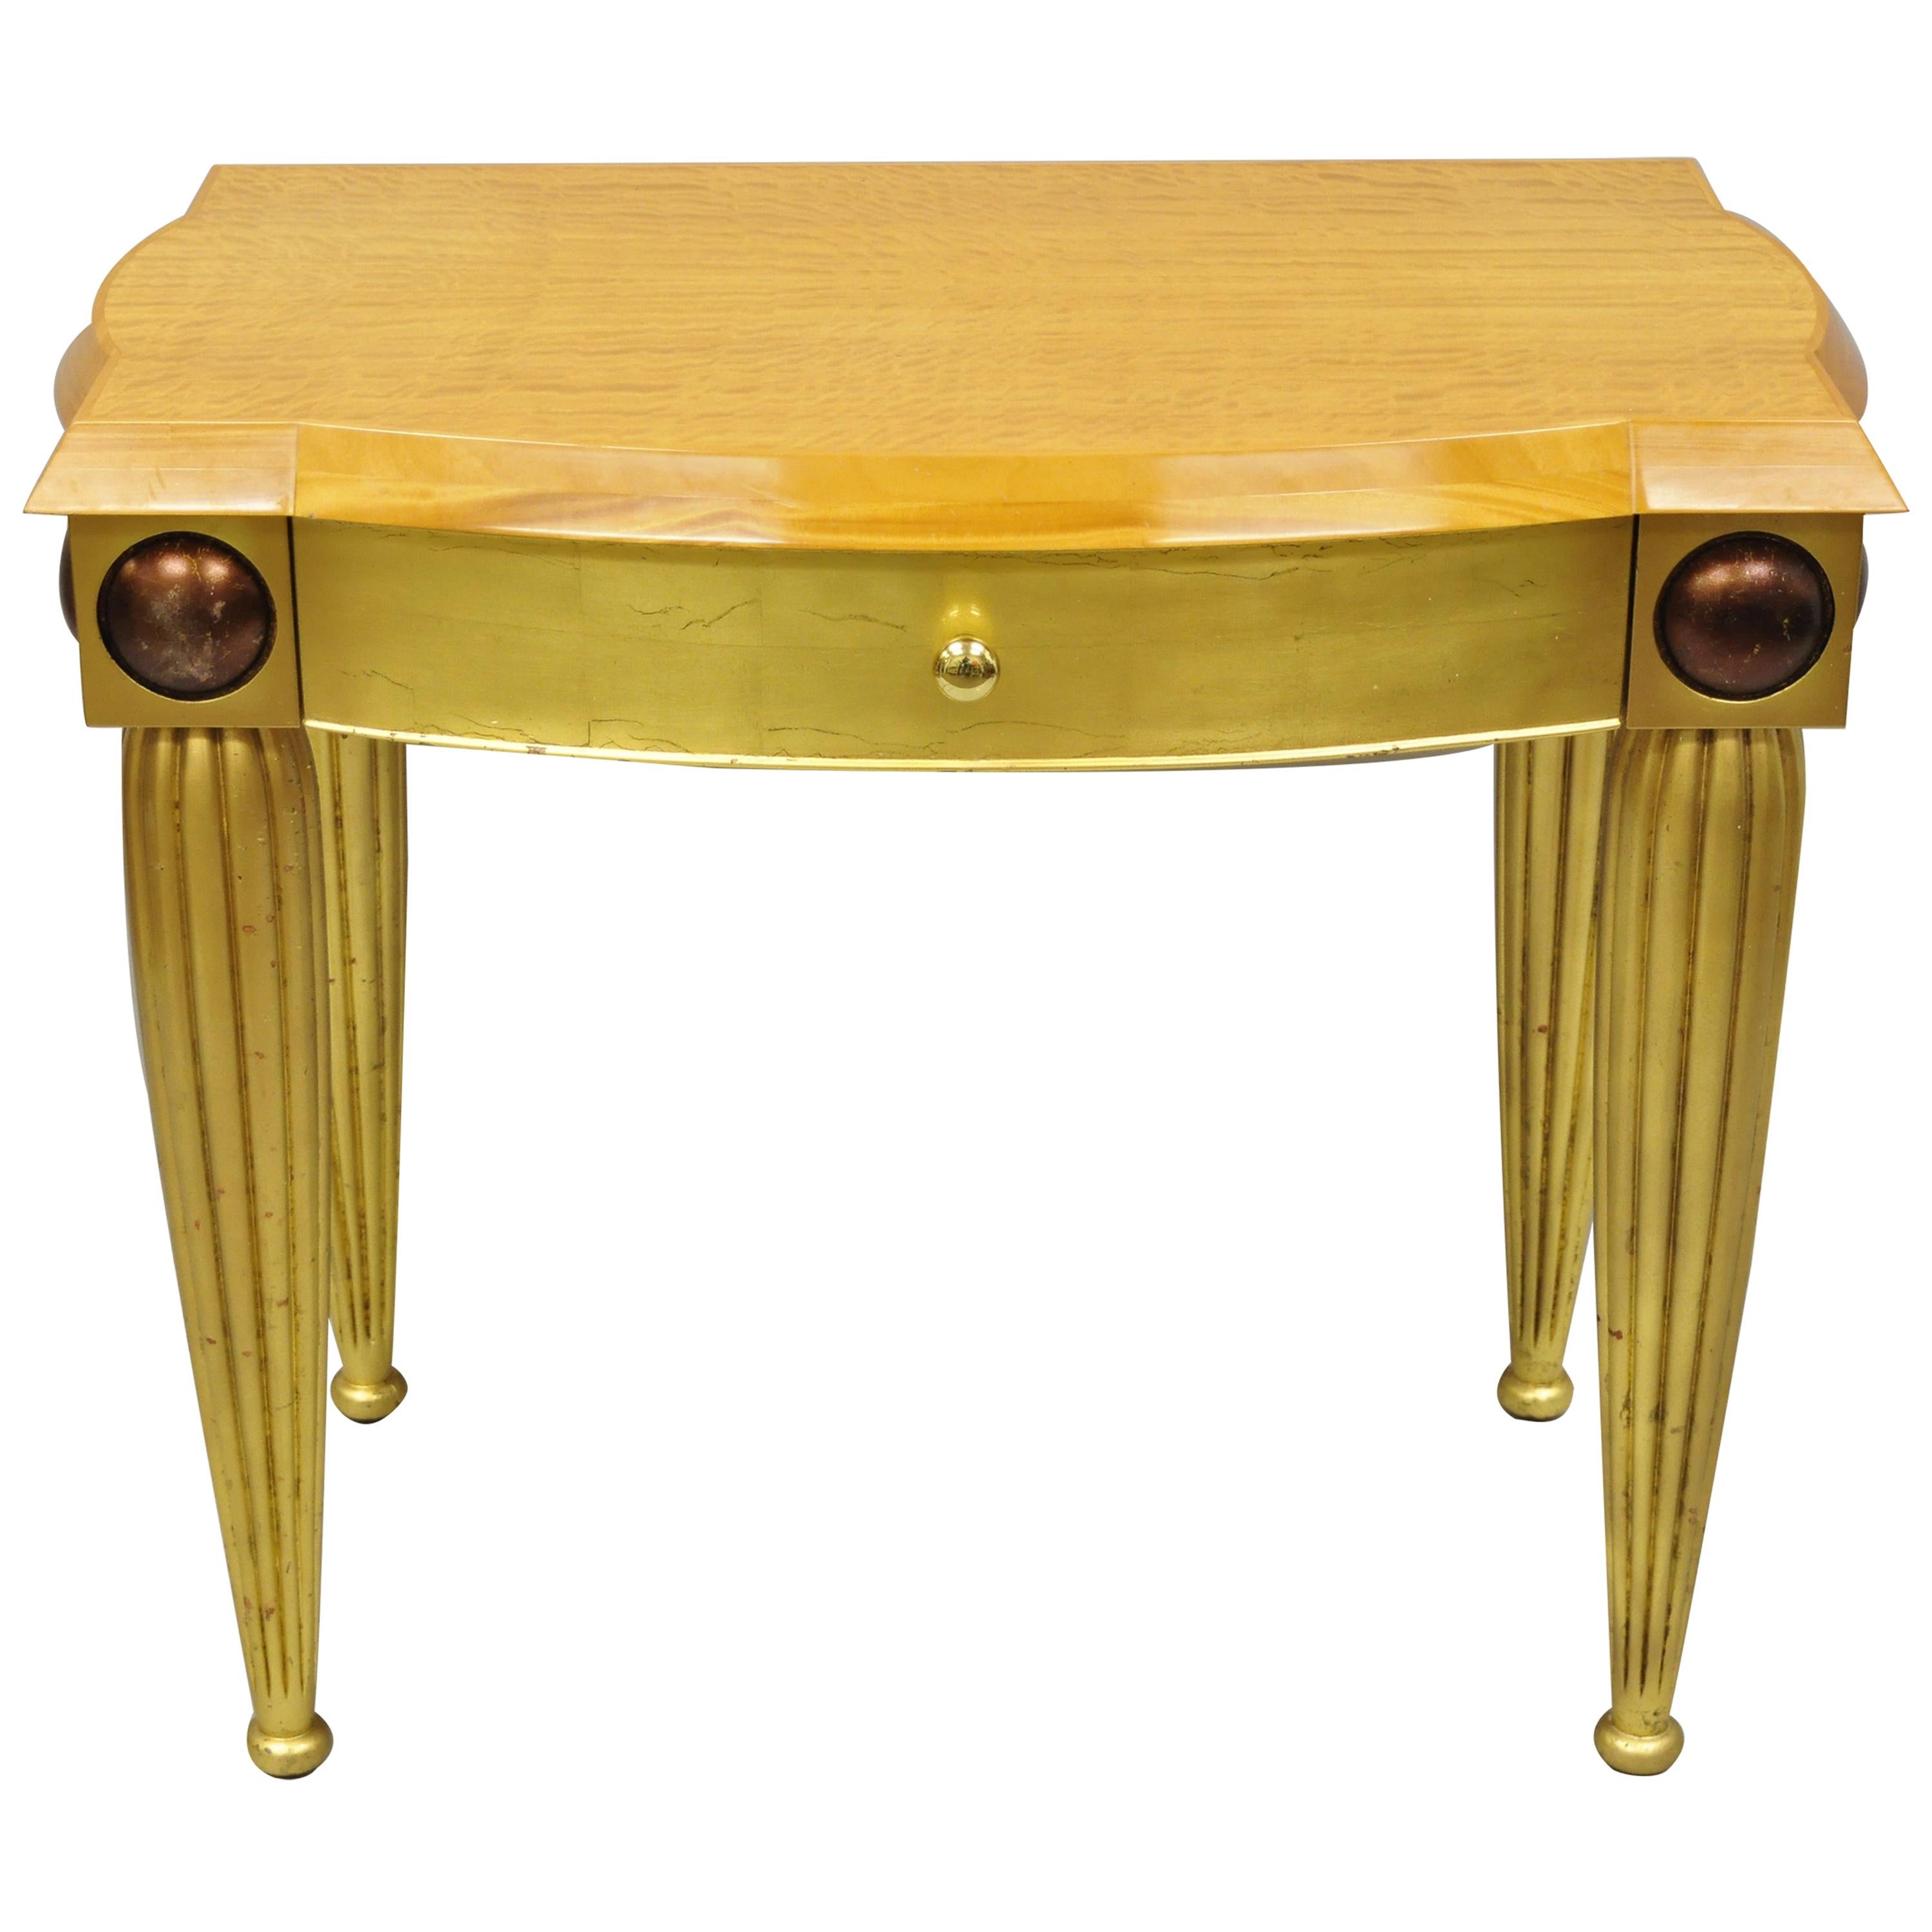 Italian Hollywood Regency Curly Maple Gold Gilt Leaf 1 Drawer Console Hall Table For Sale